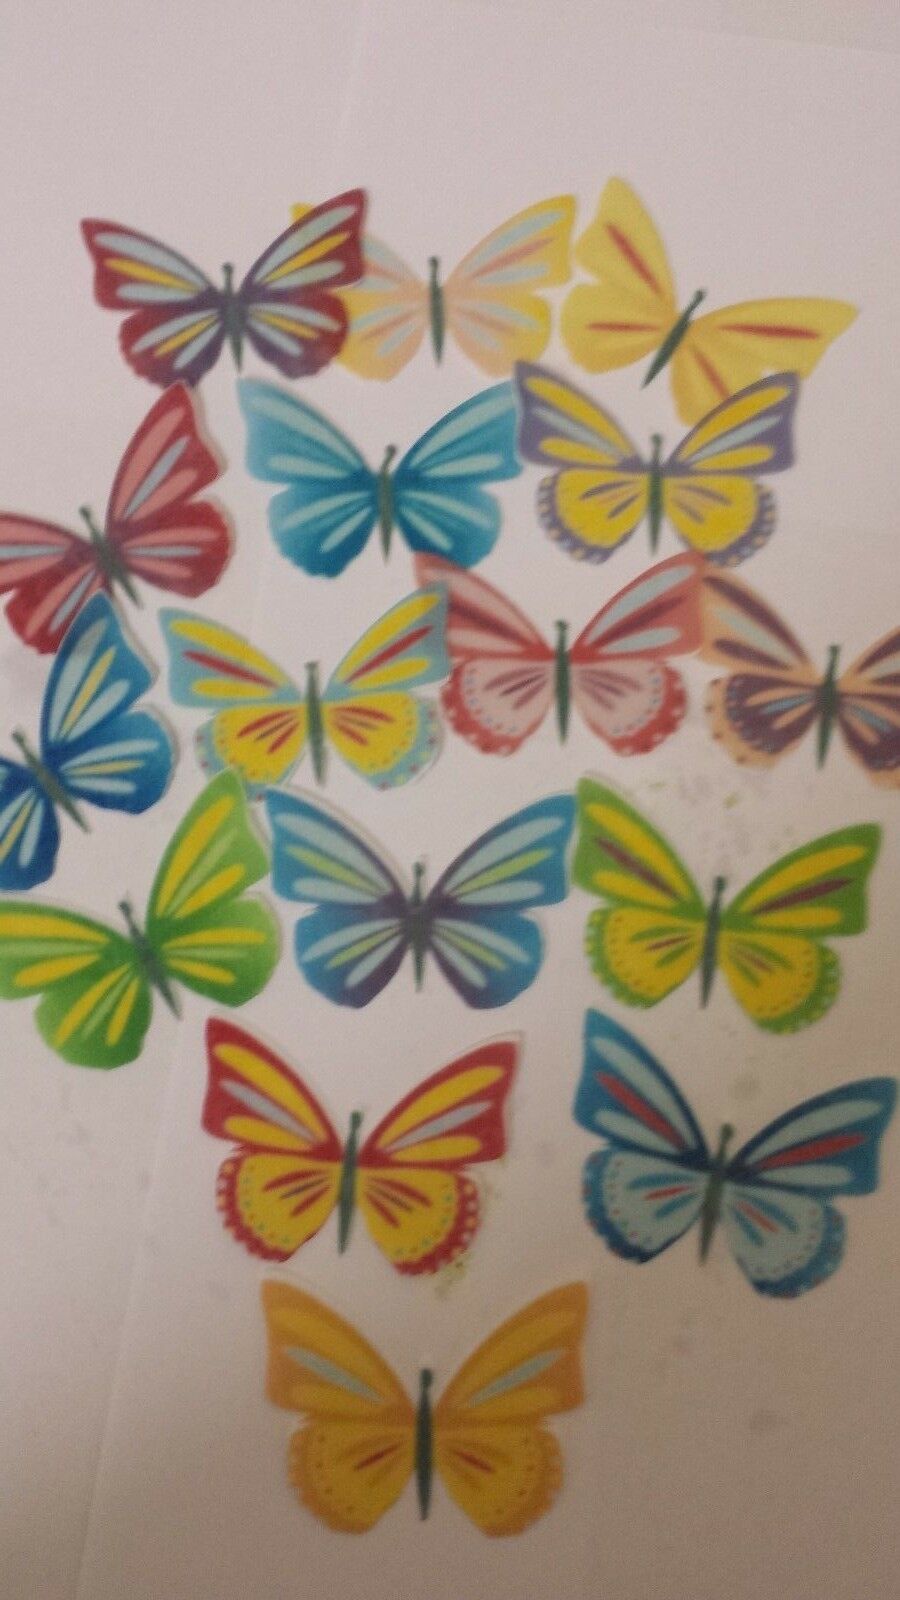 16 PRECUT Multi Colour Edible wafer/rice paper Butterflies cake/cupcake toppers